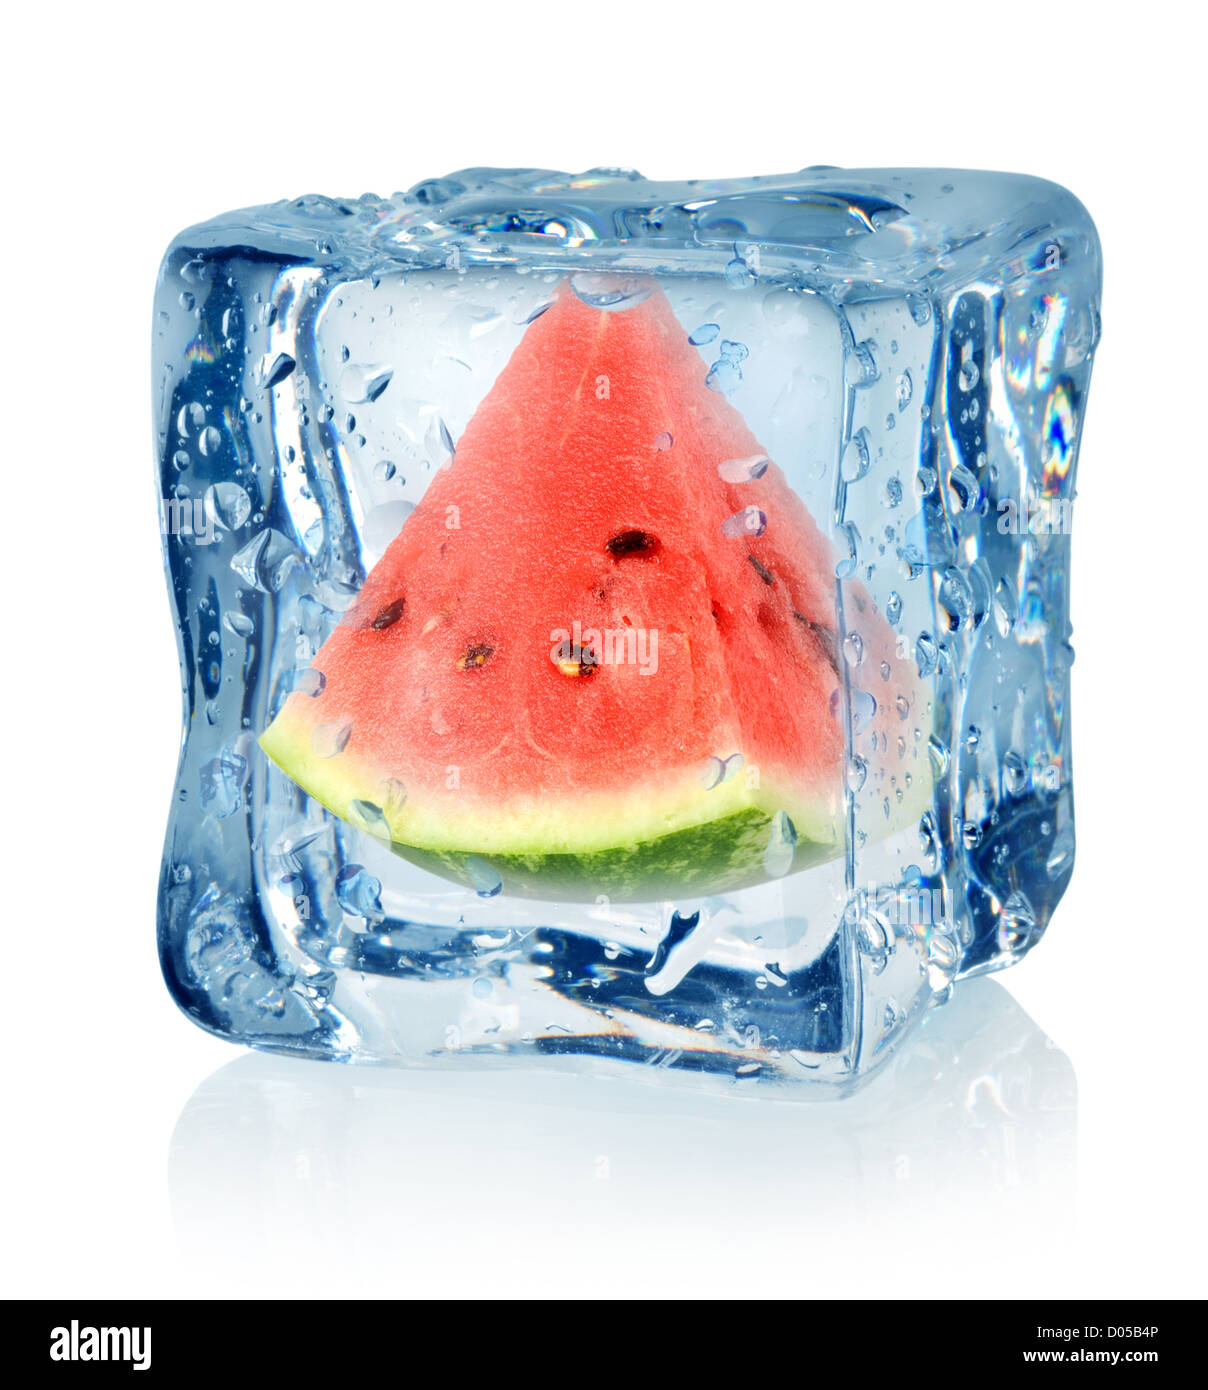 Ice cube and watermelon isolated on a white background Stock Photo